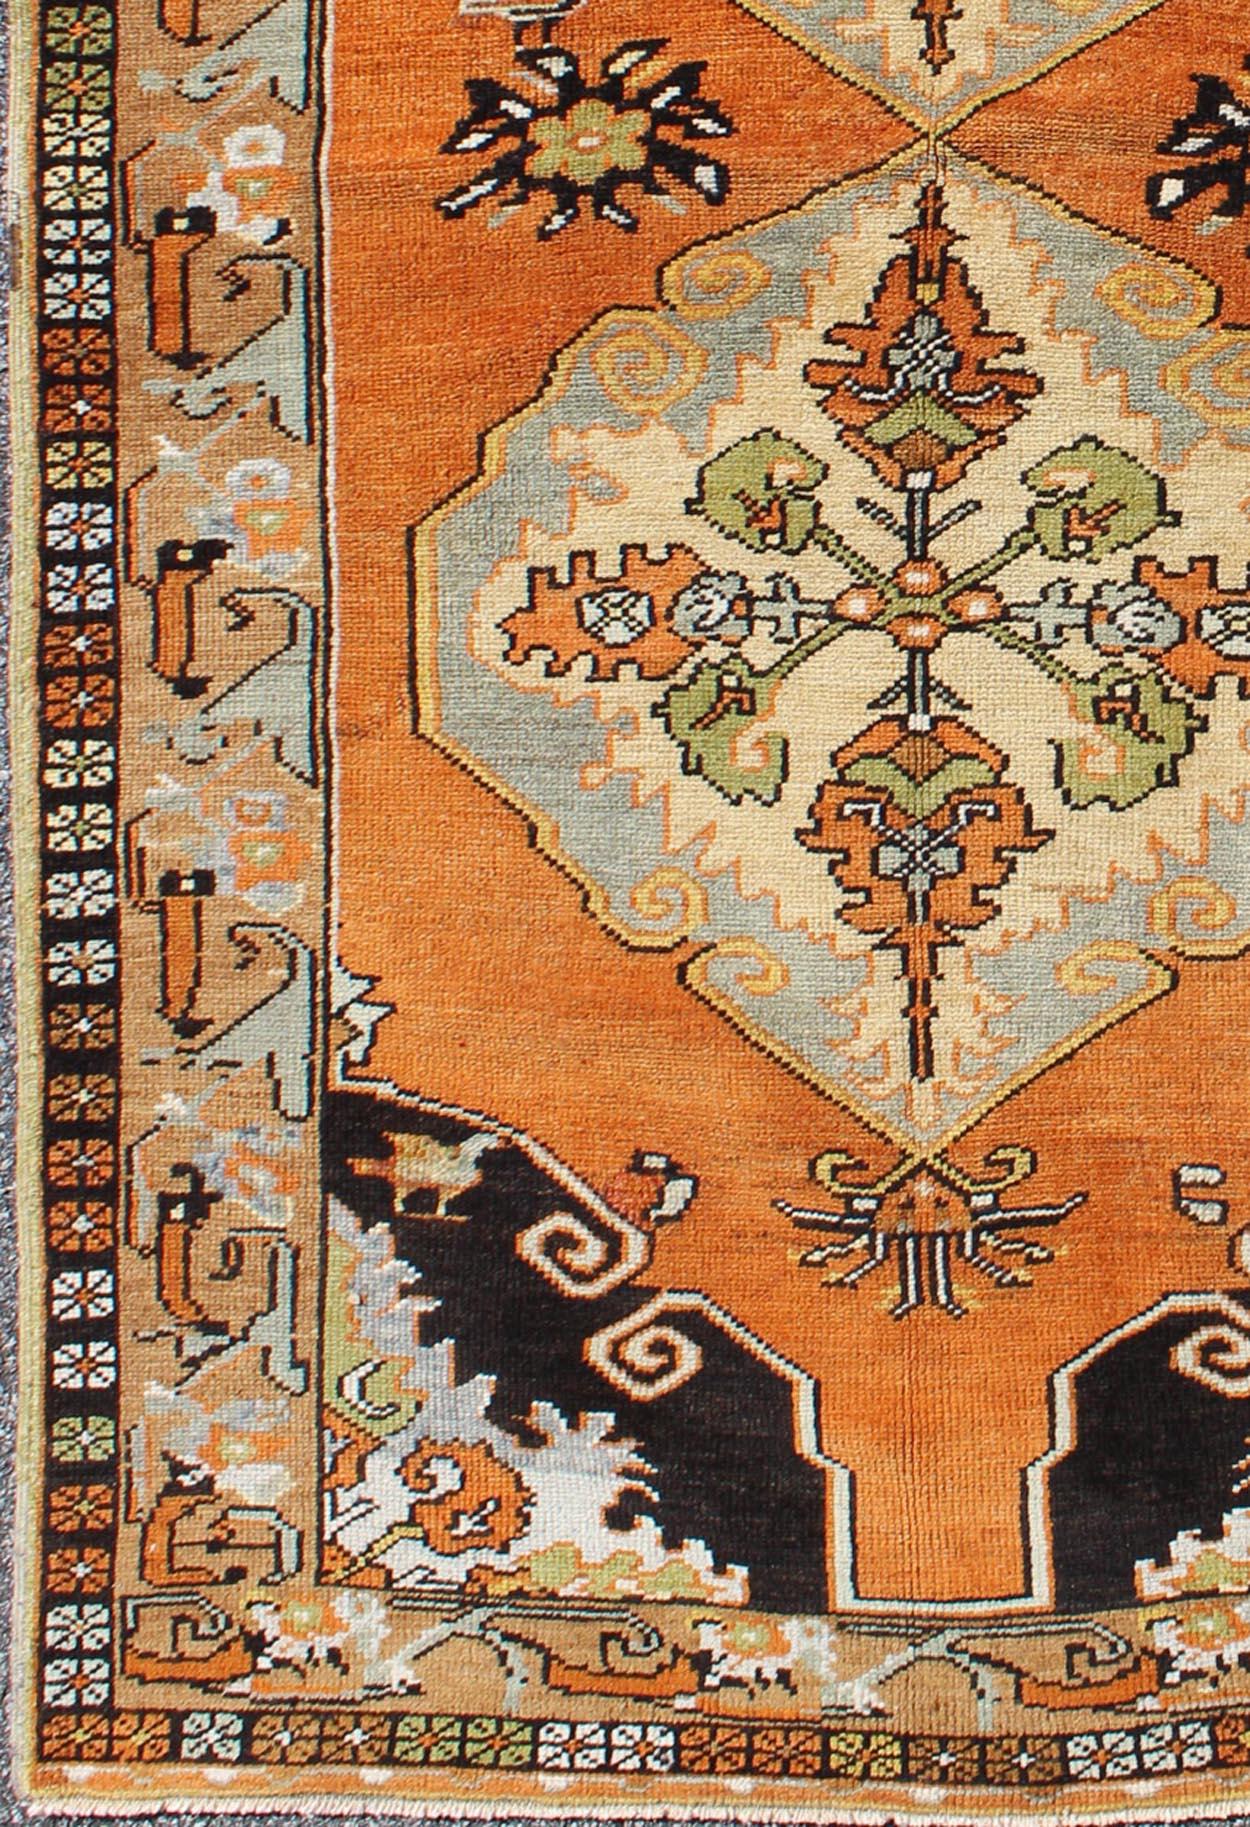 Measures: 3'9 x 6'5

This vibrantly colored Turkish Oushak features two medallions and a highly detailed design set on an orange background with dark brown and light taupe colors and stunning blue corner borders. The bold and geometric design is